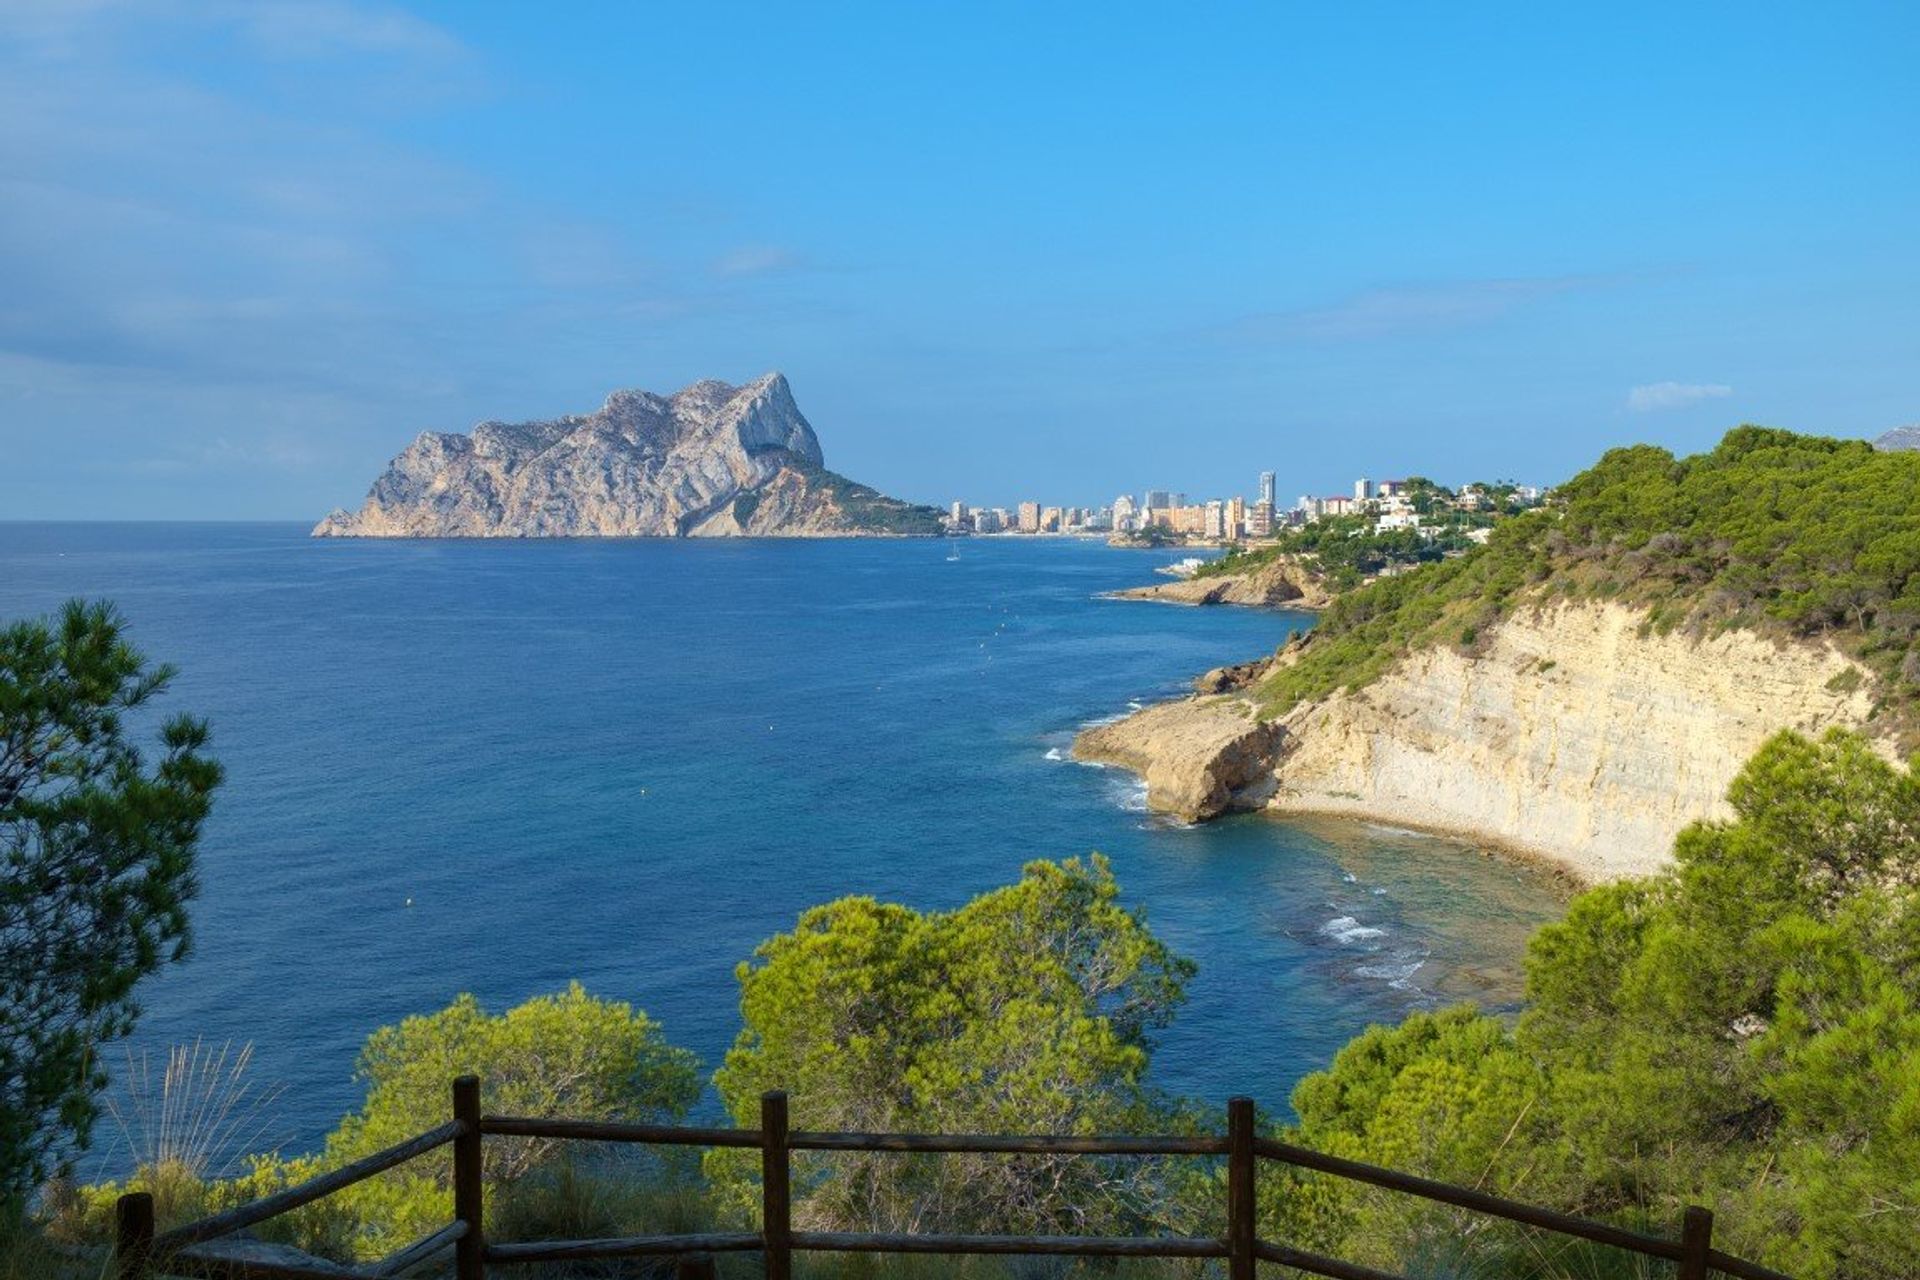 Take a scenic stroll along the coast with Penon de Ifach Natural Park in the distance, between Calpe and Moraira